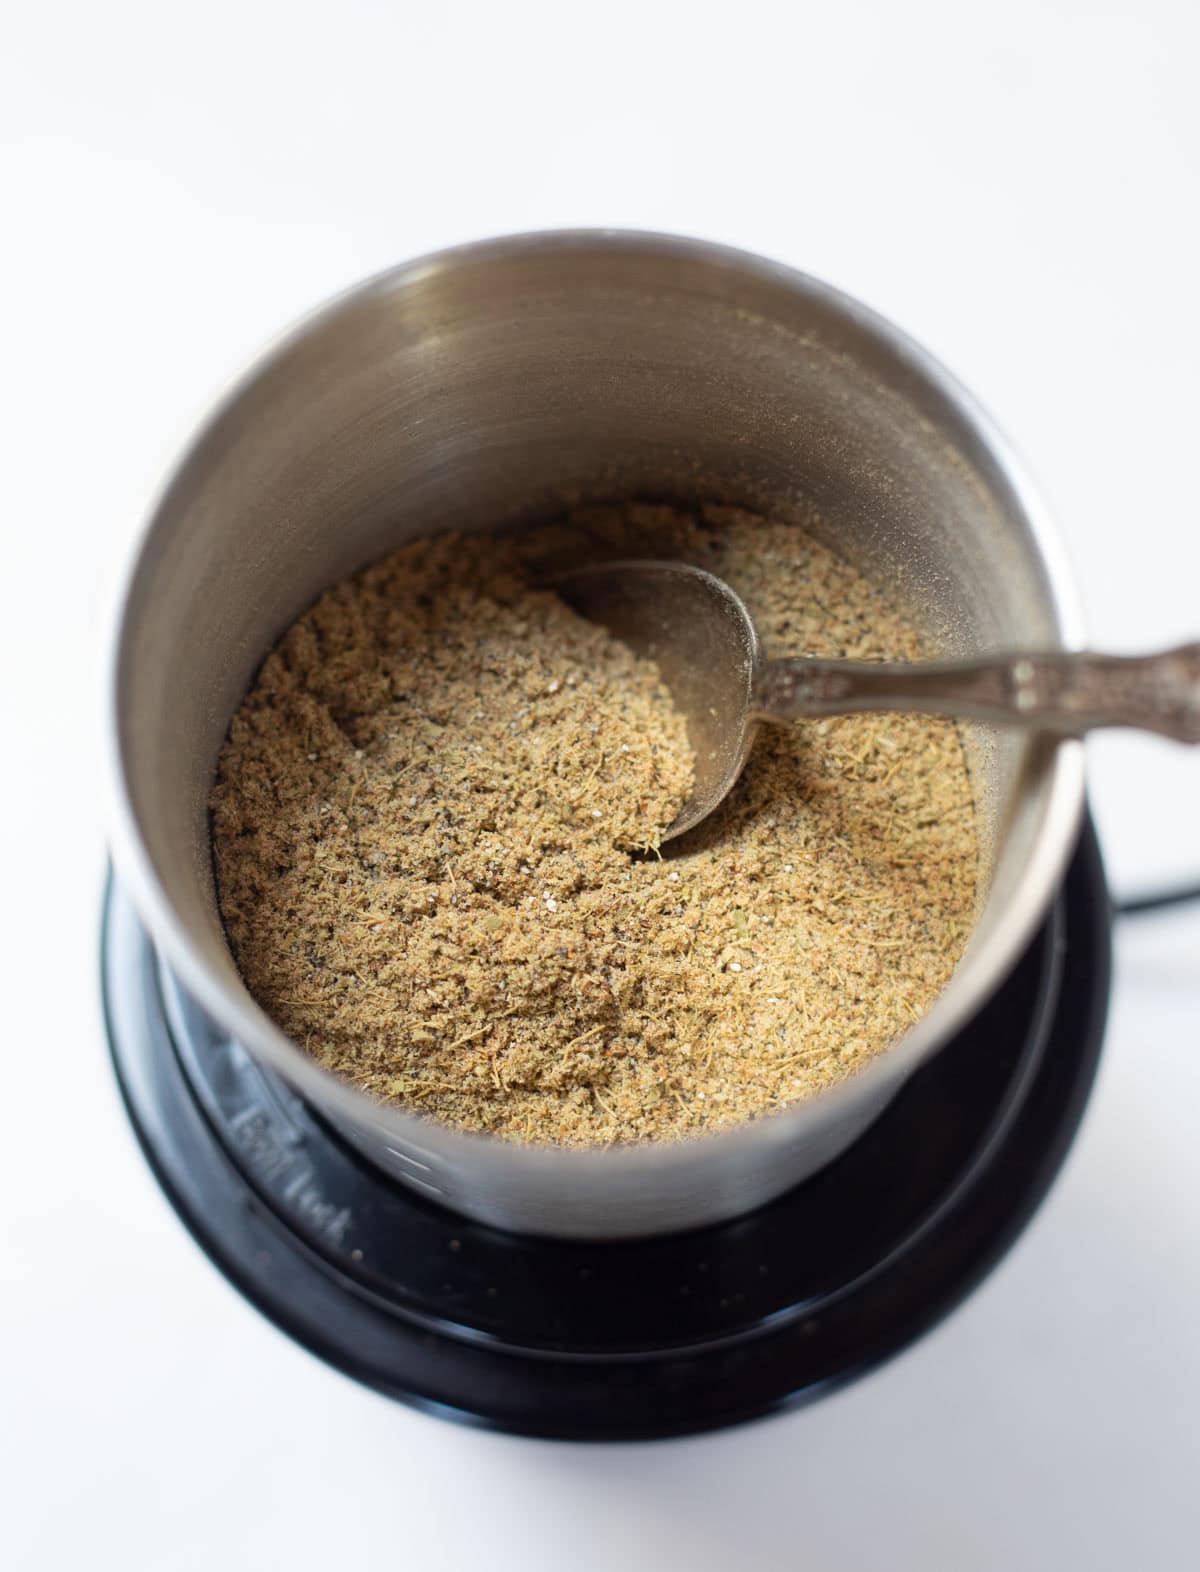 cardamom powder in a spice grinder with silver spoon